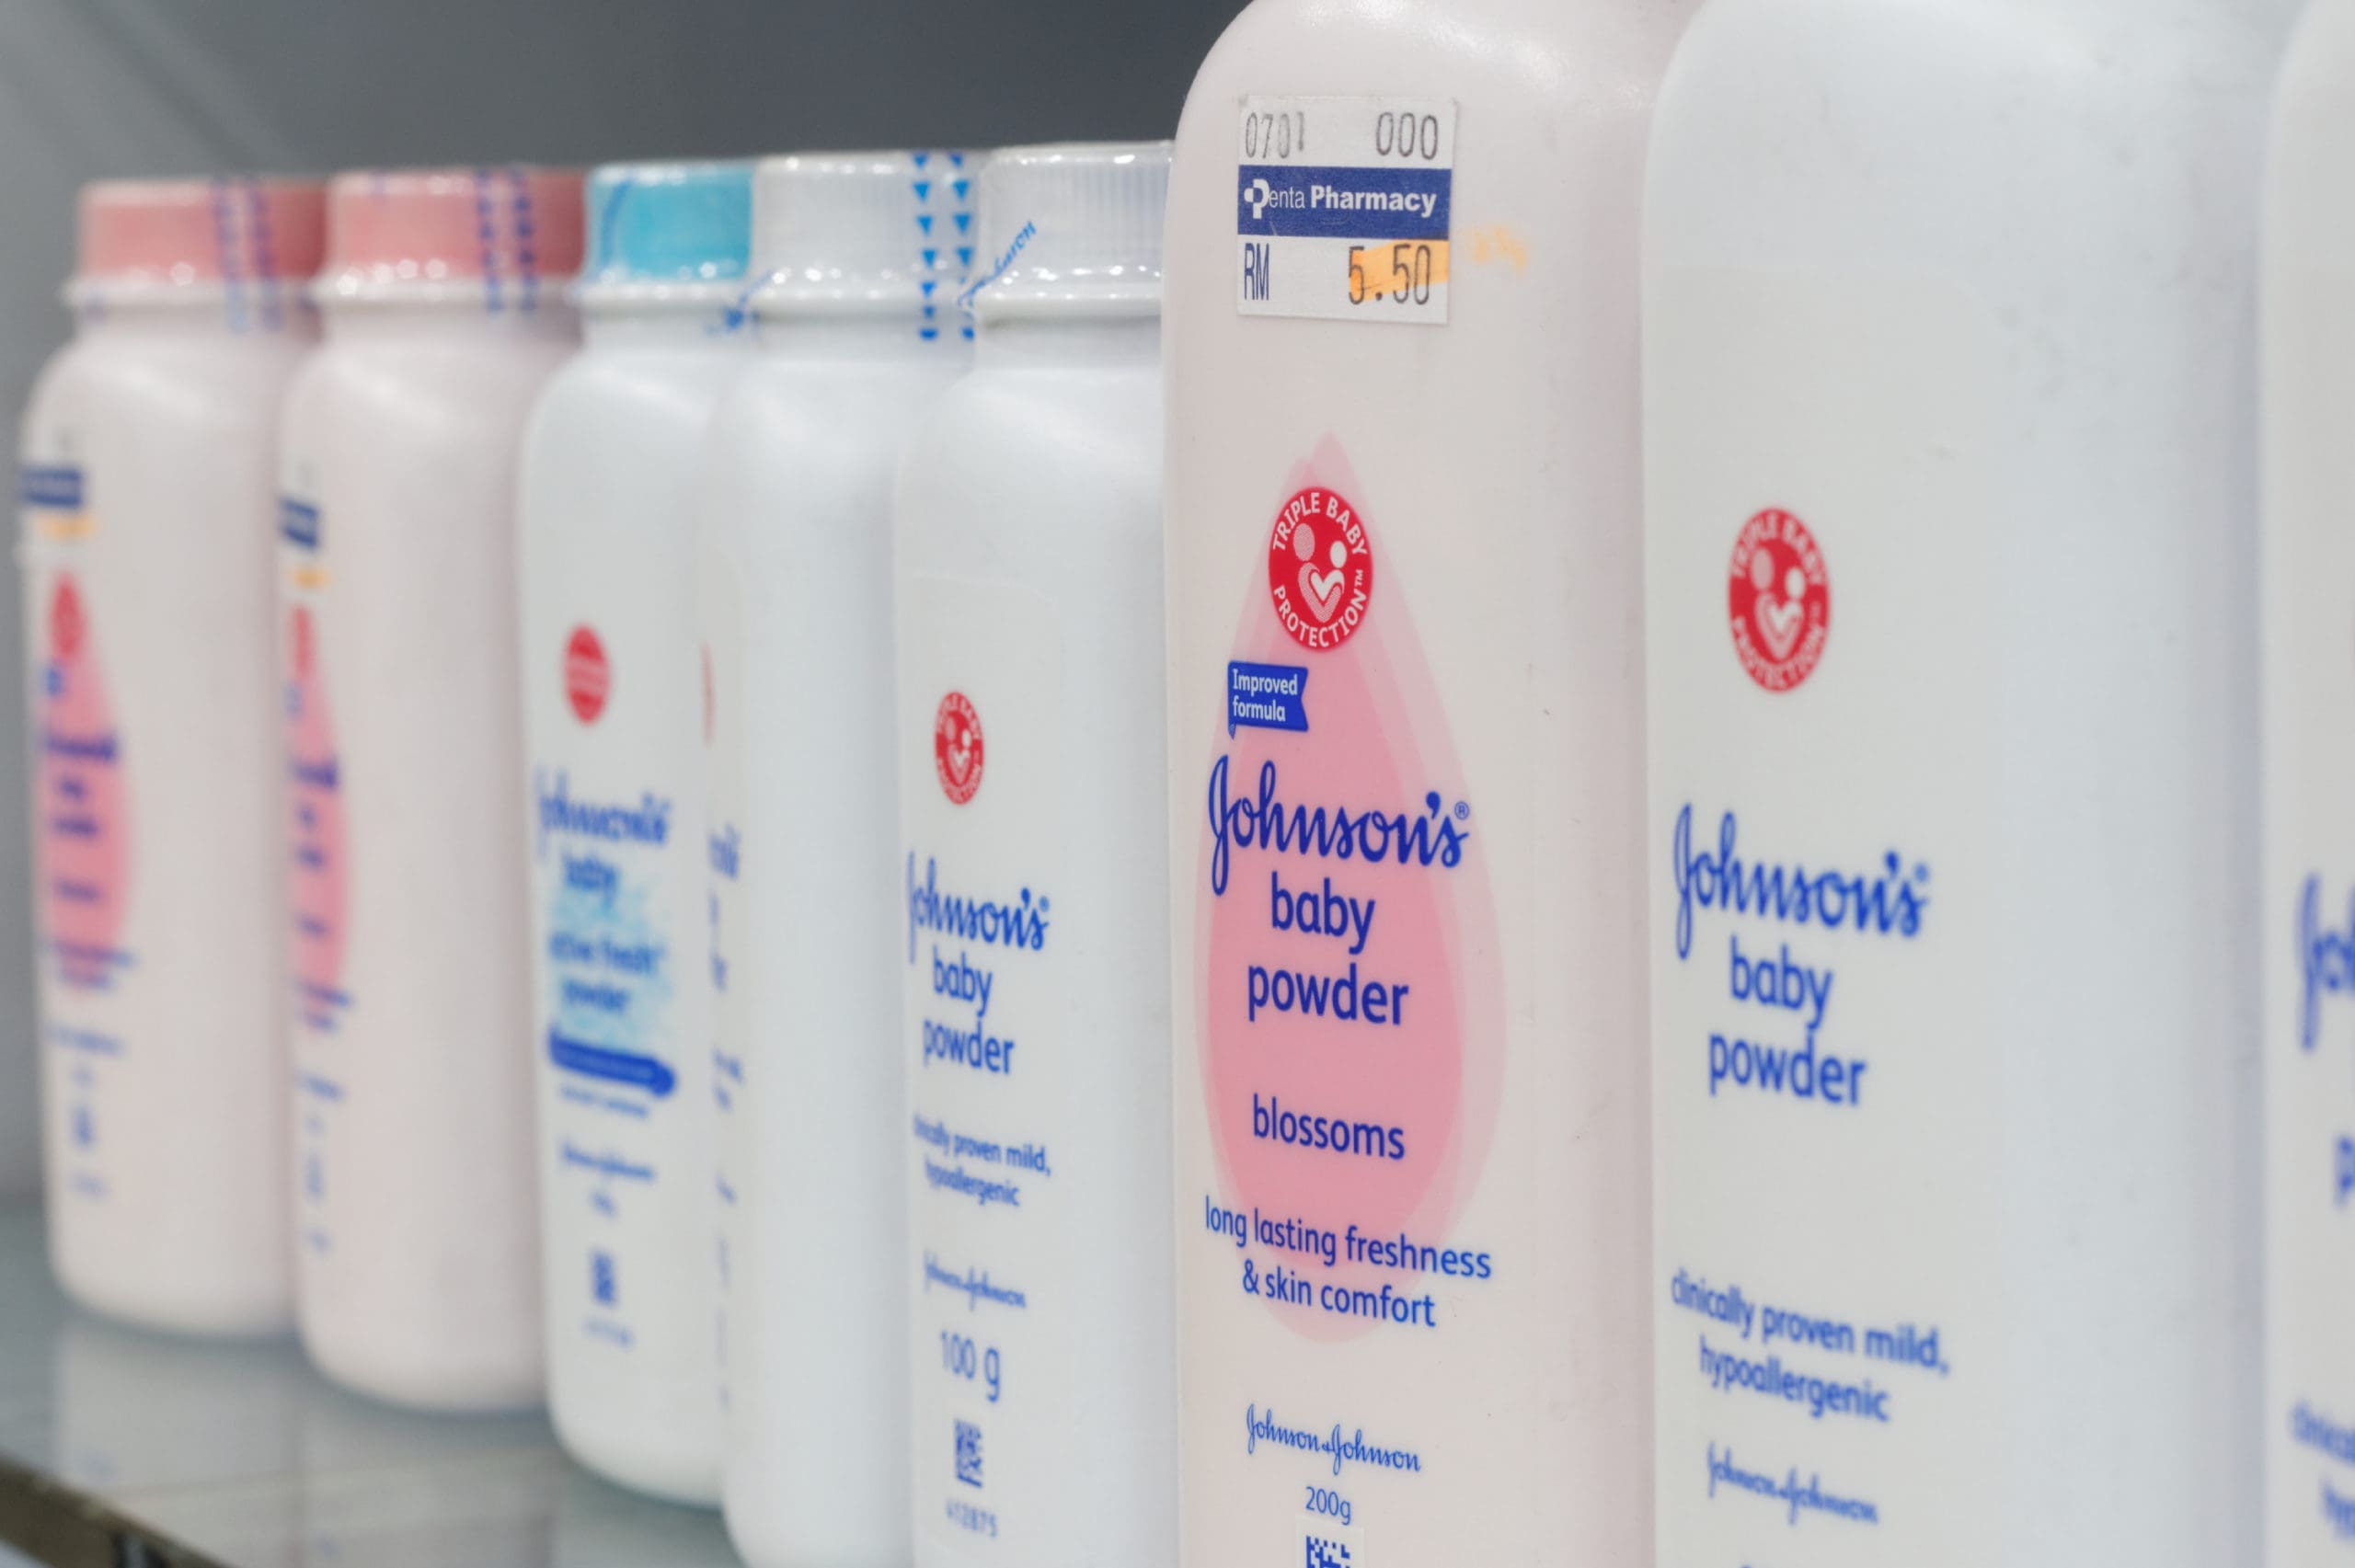 What Injuries Can You Suffer from Talcum Powder Exposure?